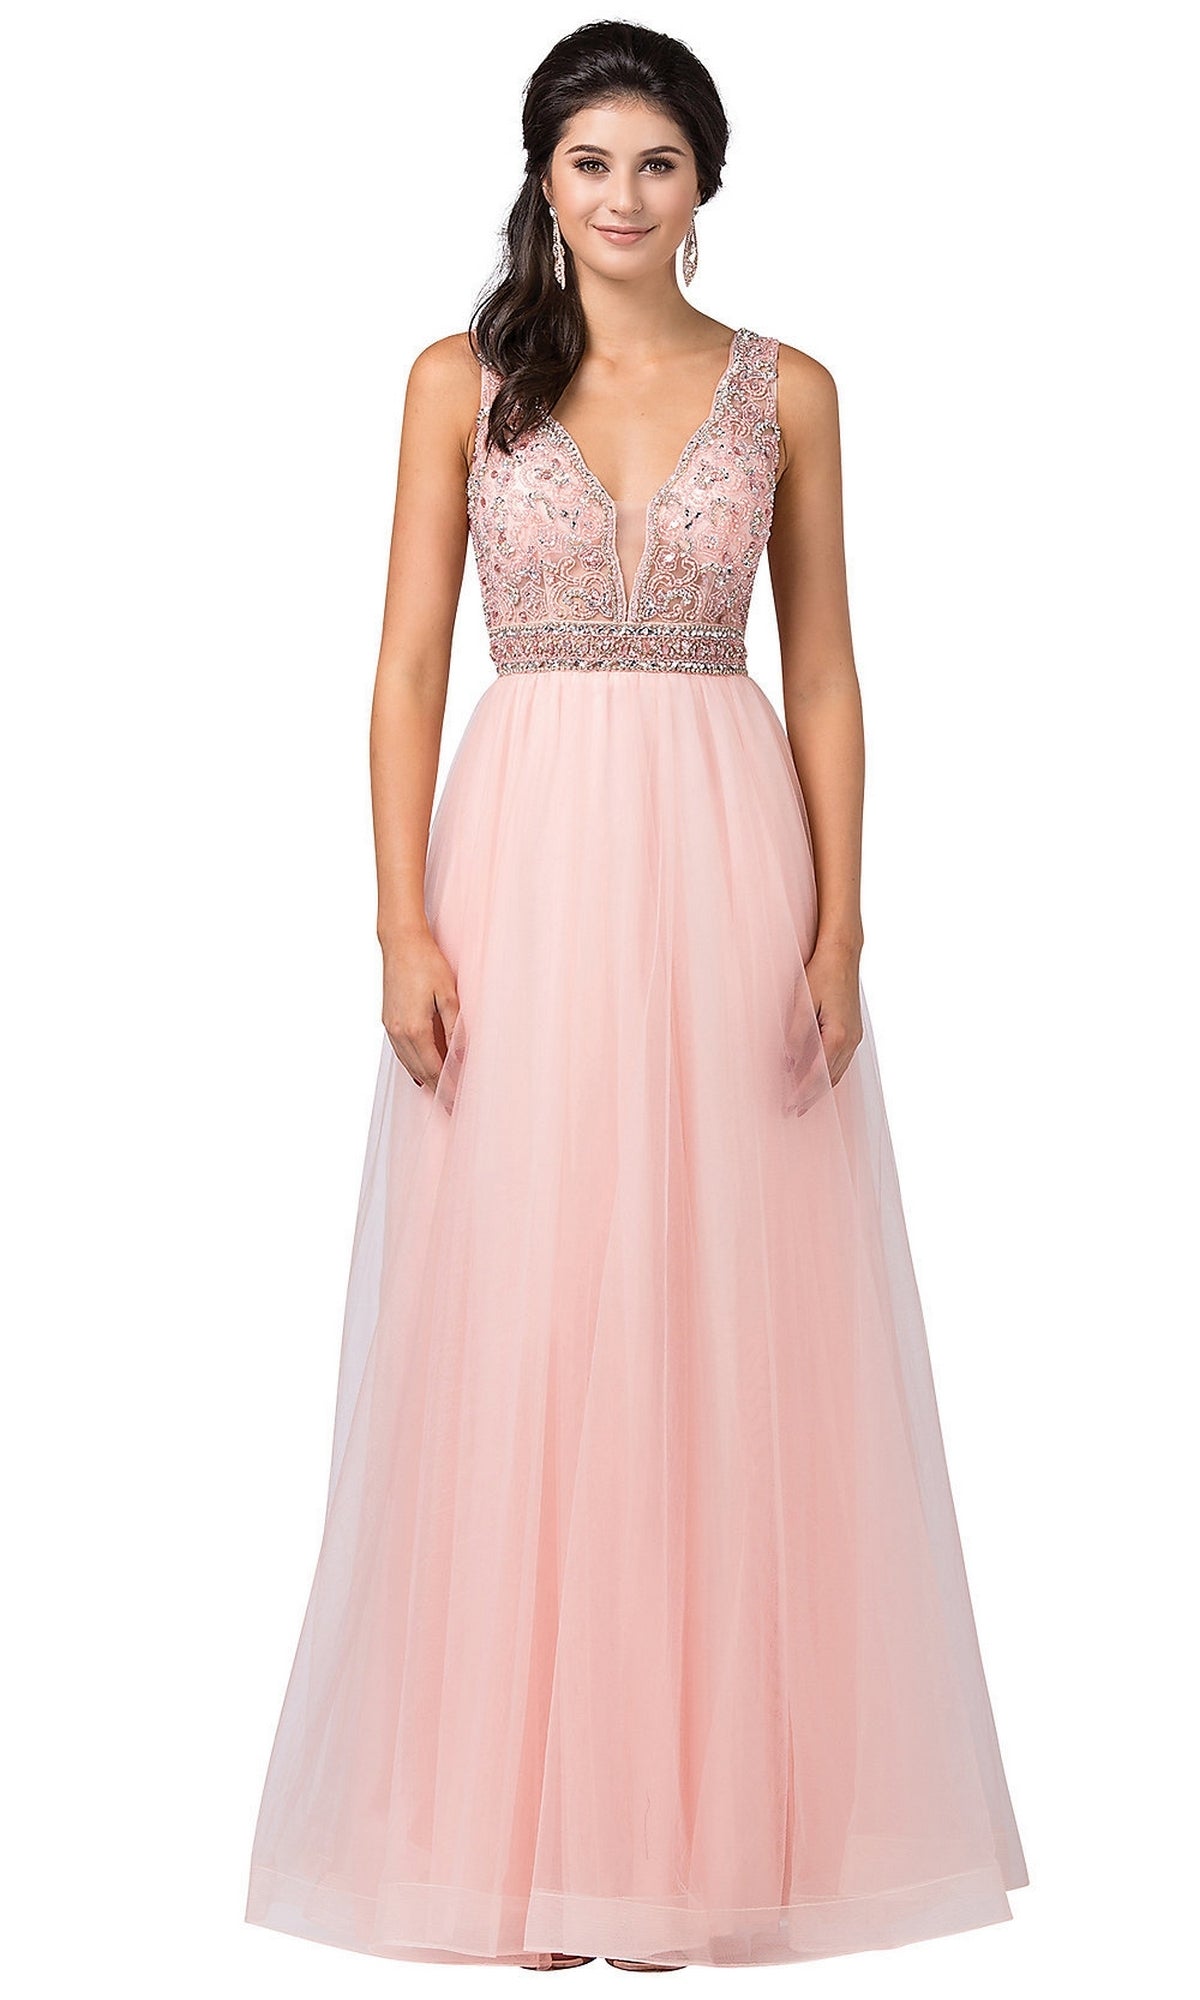 Blush Formal Ball Gown with Embellished Sheer Bodice